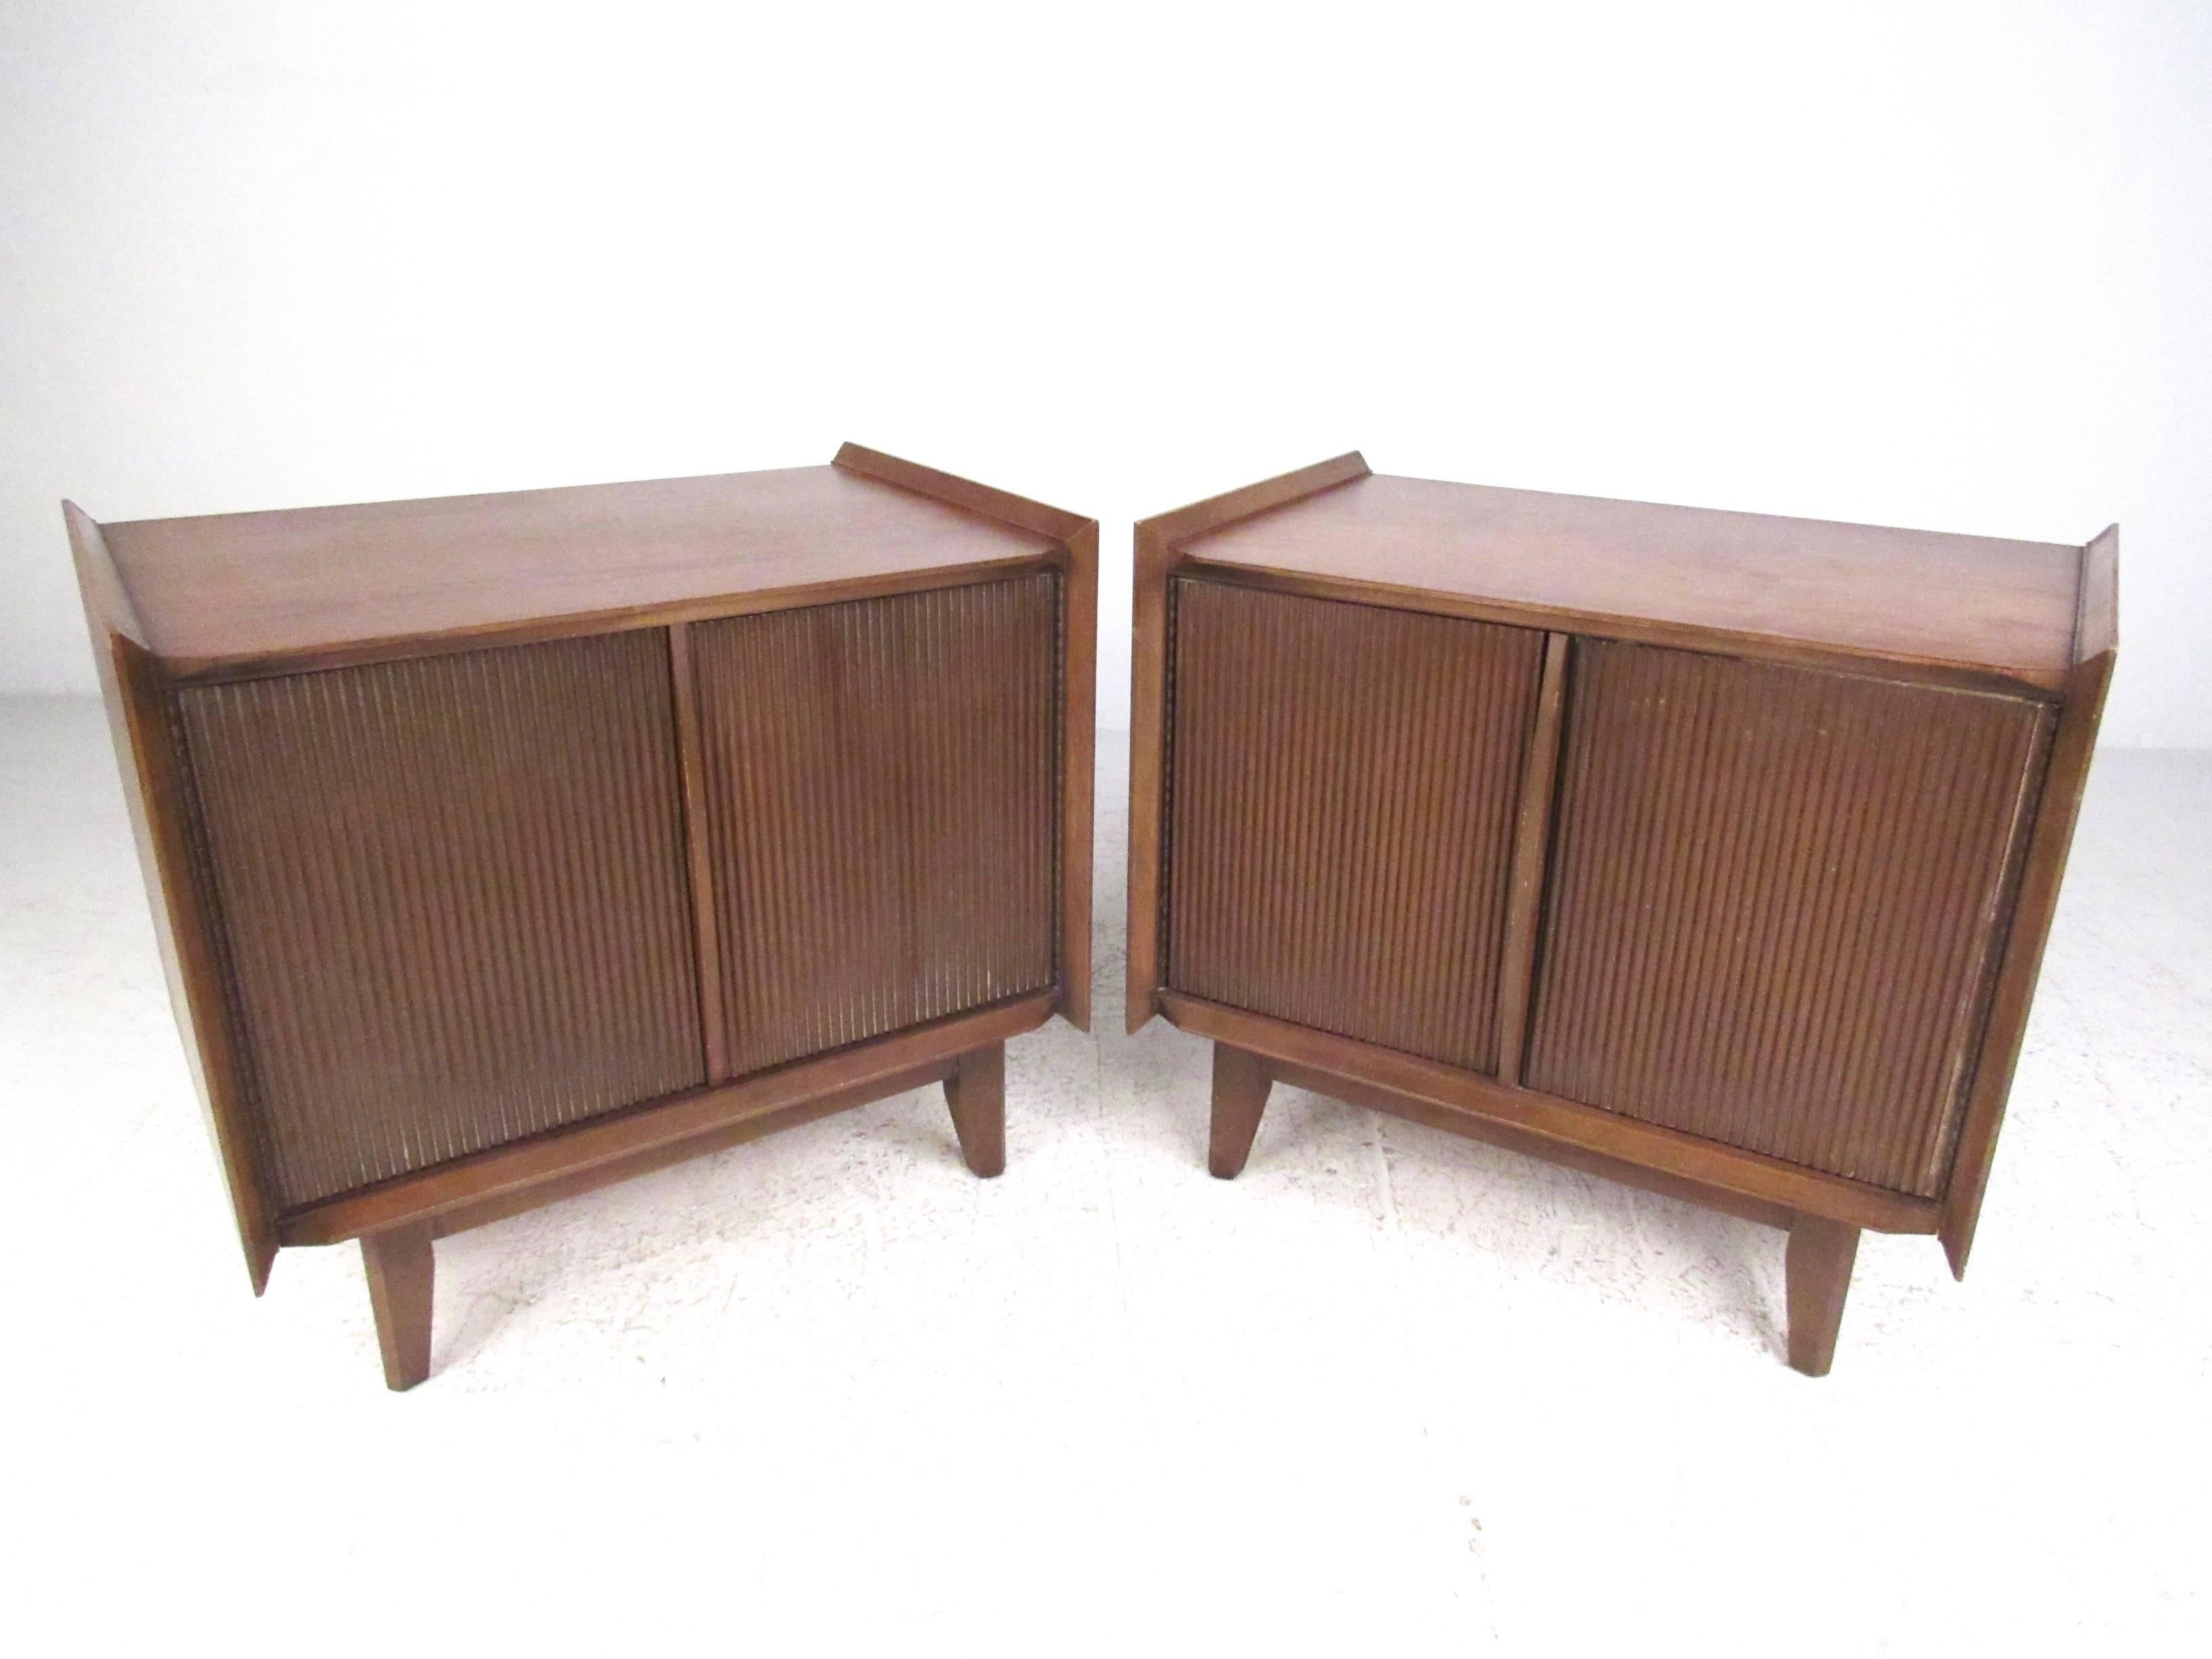 This vintage pair of sculpted front walnut nightstands make a stylish addition to decor in any interior. From bedside lamp table to occasional storage for living room or office, the matching pair offers open cabinet storage and features iconic